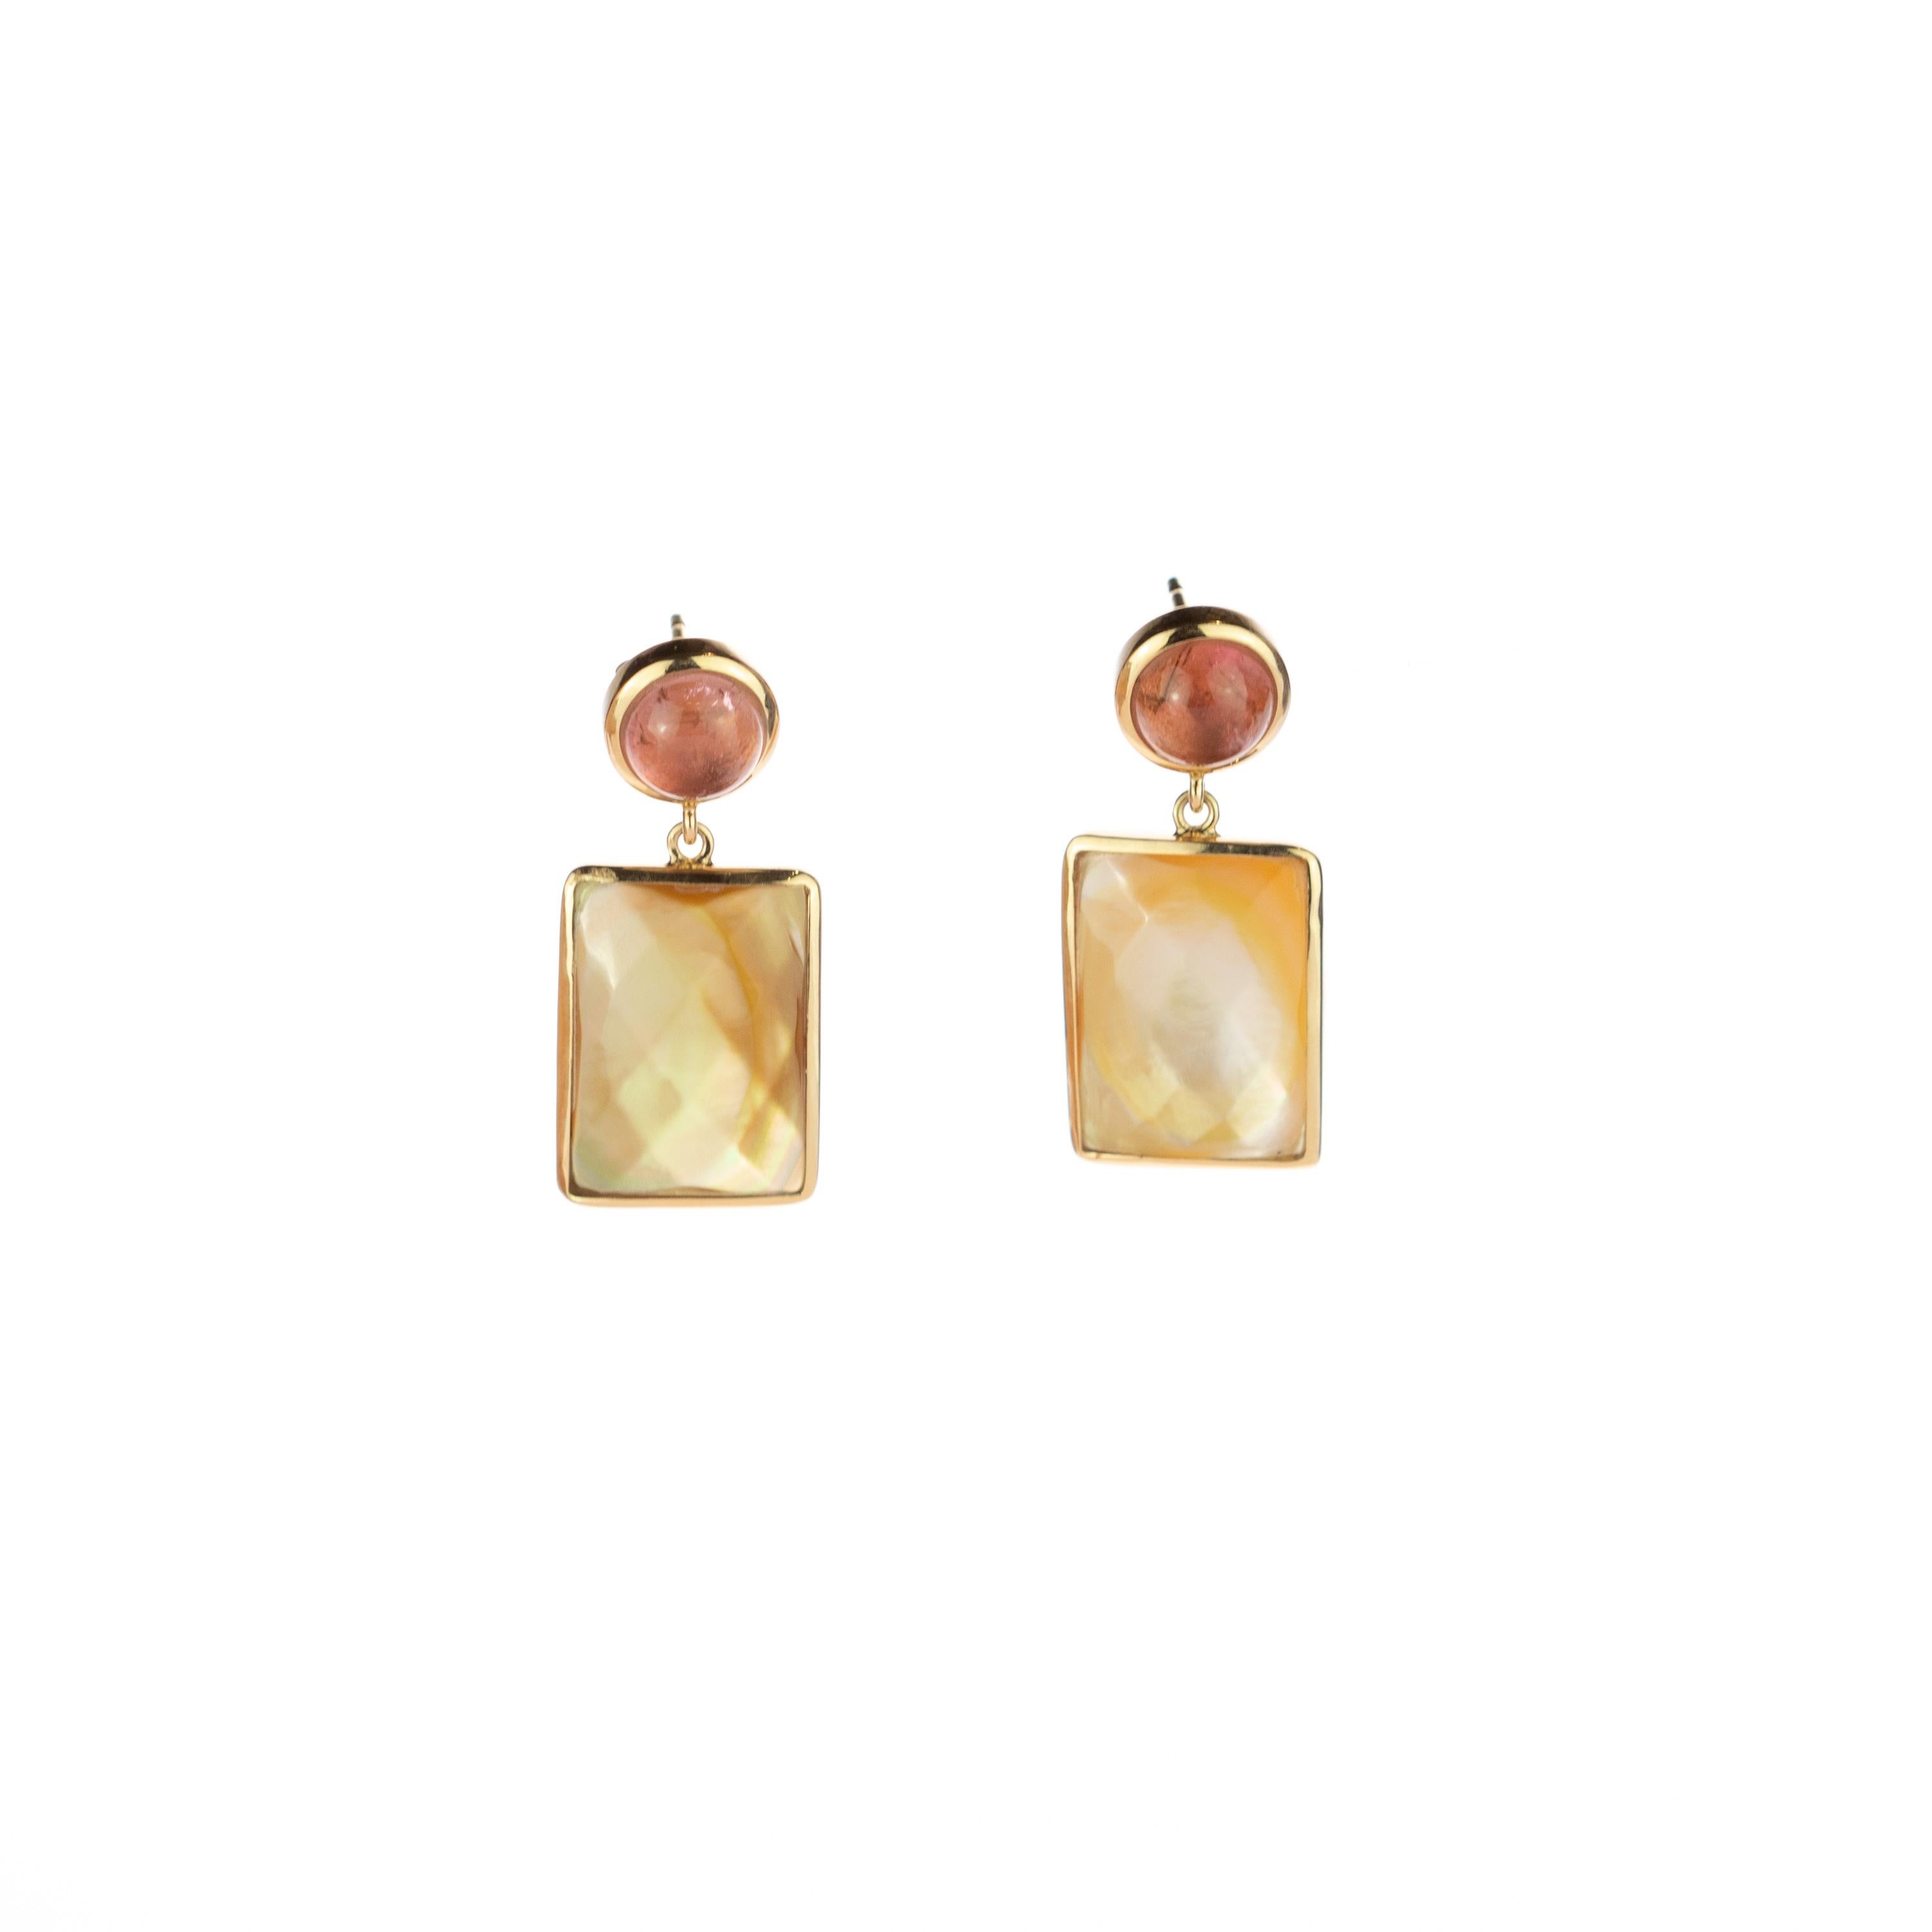 One of a kind square Mother of Pearl and natural Tourmaline earrings surrounded by delicate 18 karat yellow gold details. Evoking all the italian tradition resulting in a stunning masterpiece with an outstanding display of color and a high quality